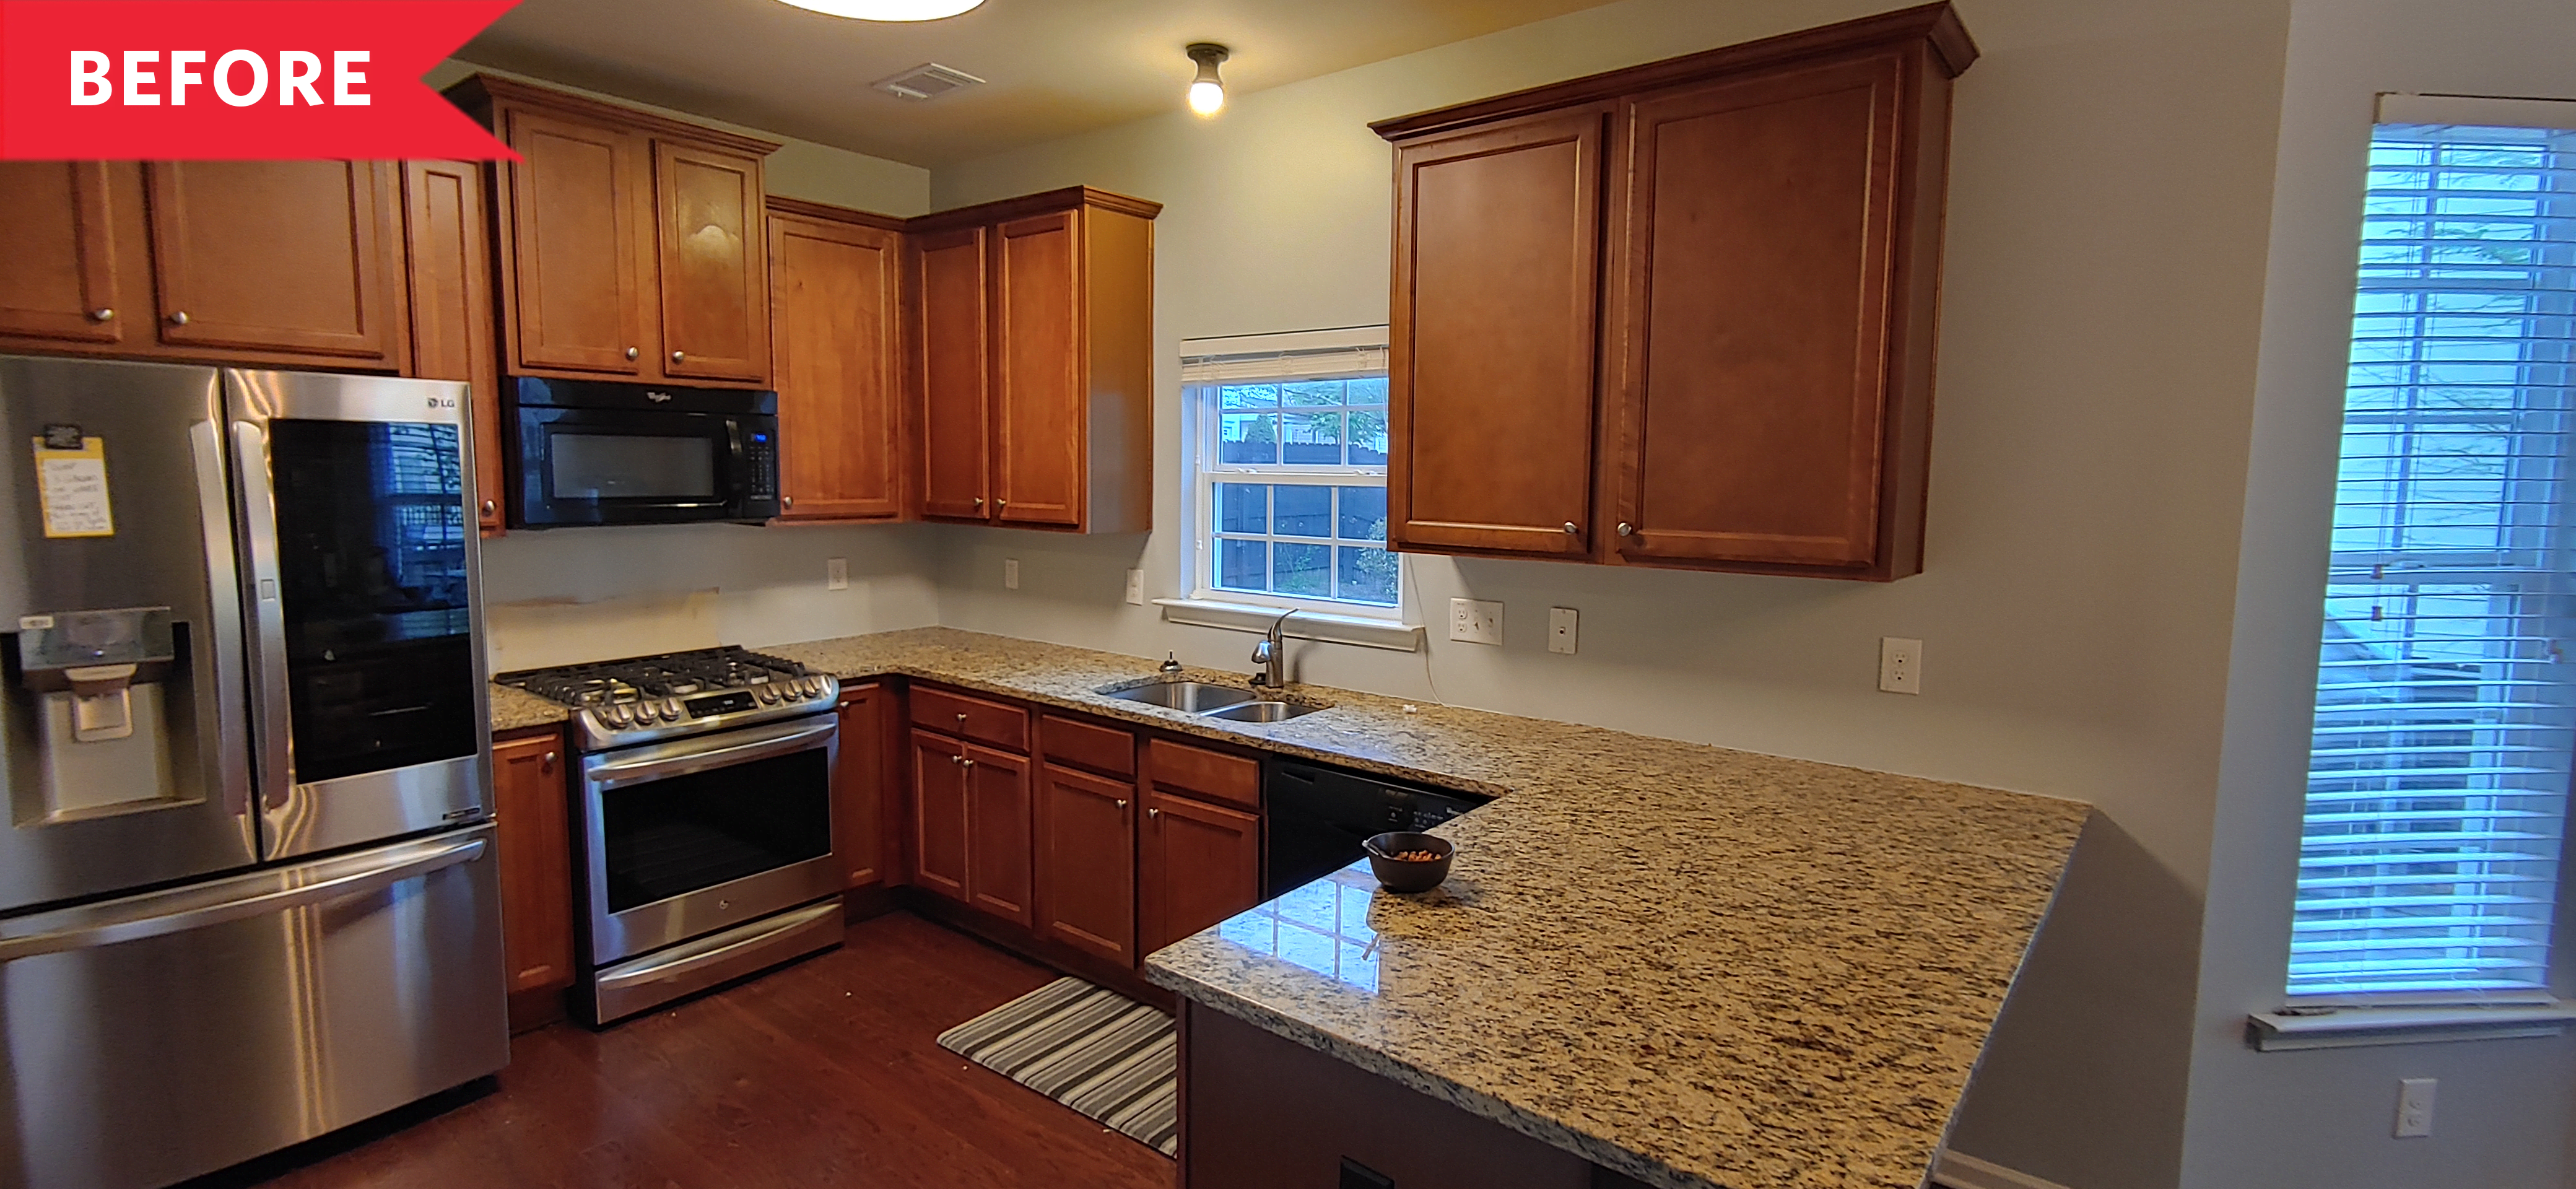 Kitchen Redo with Painted White Cabinets   Before and After Photos ...